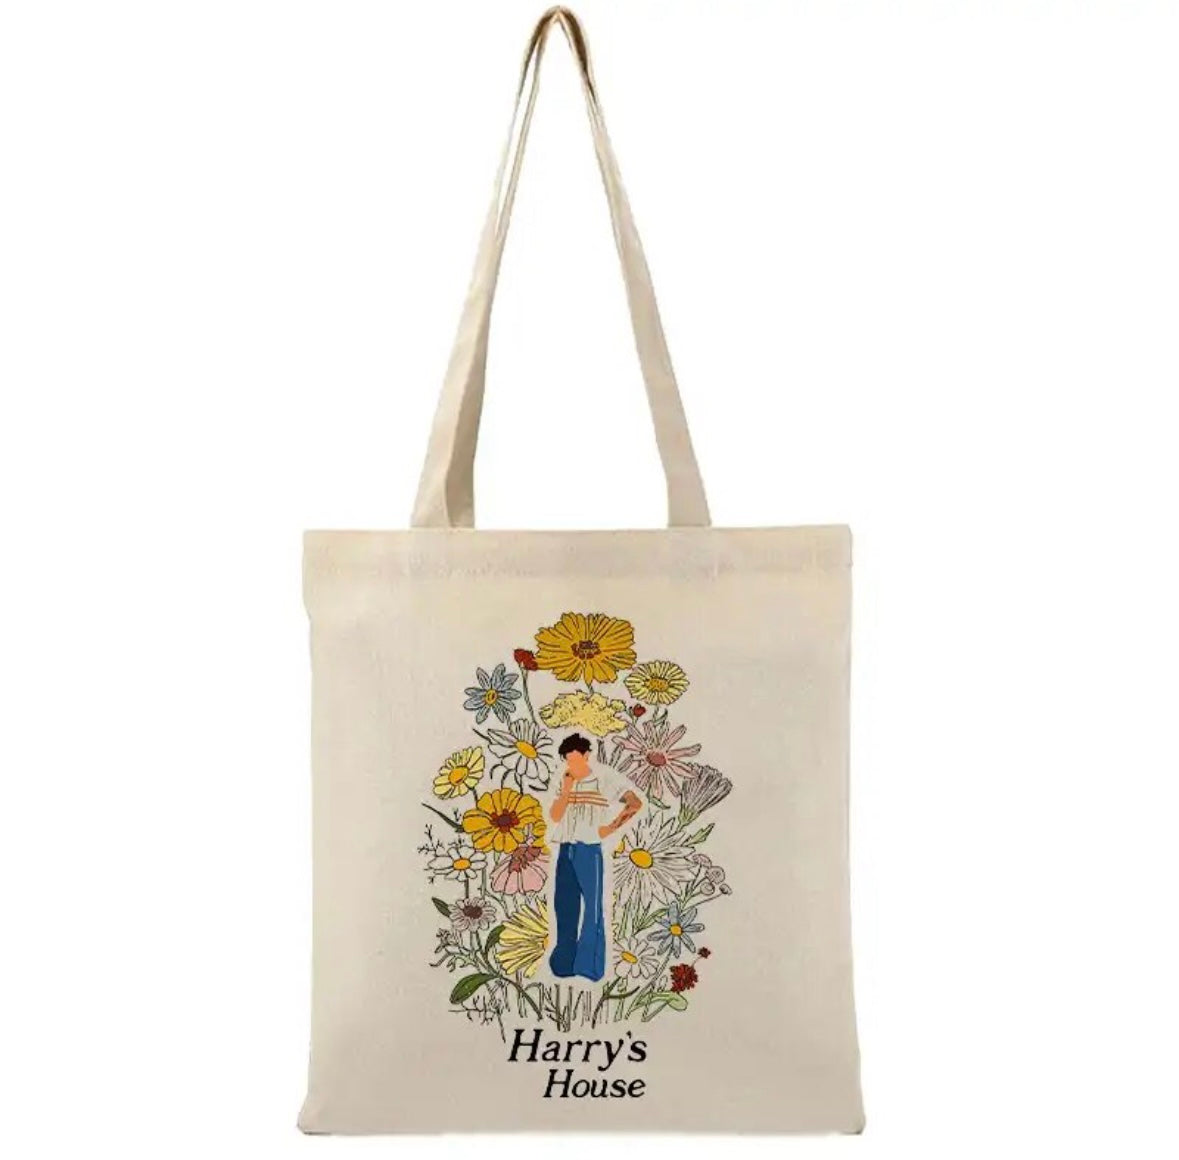 Harry’s House Cotton Tote Bag